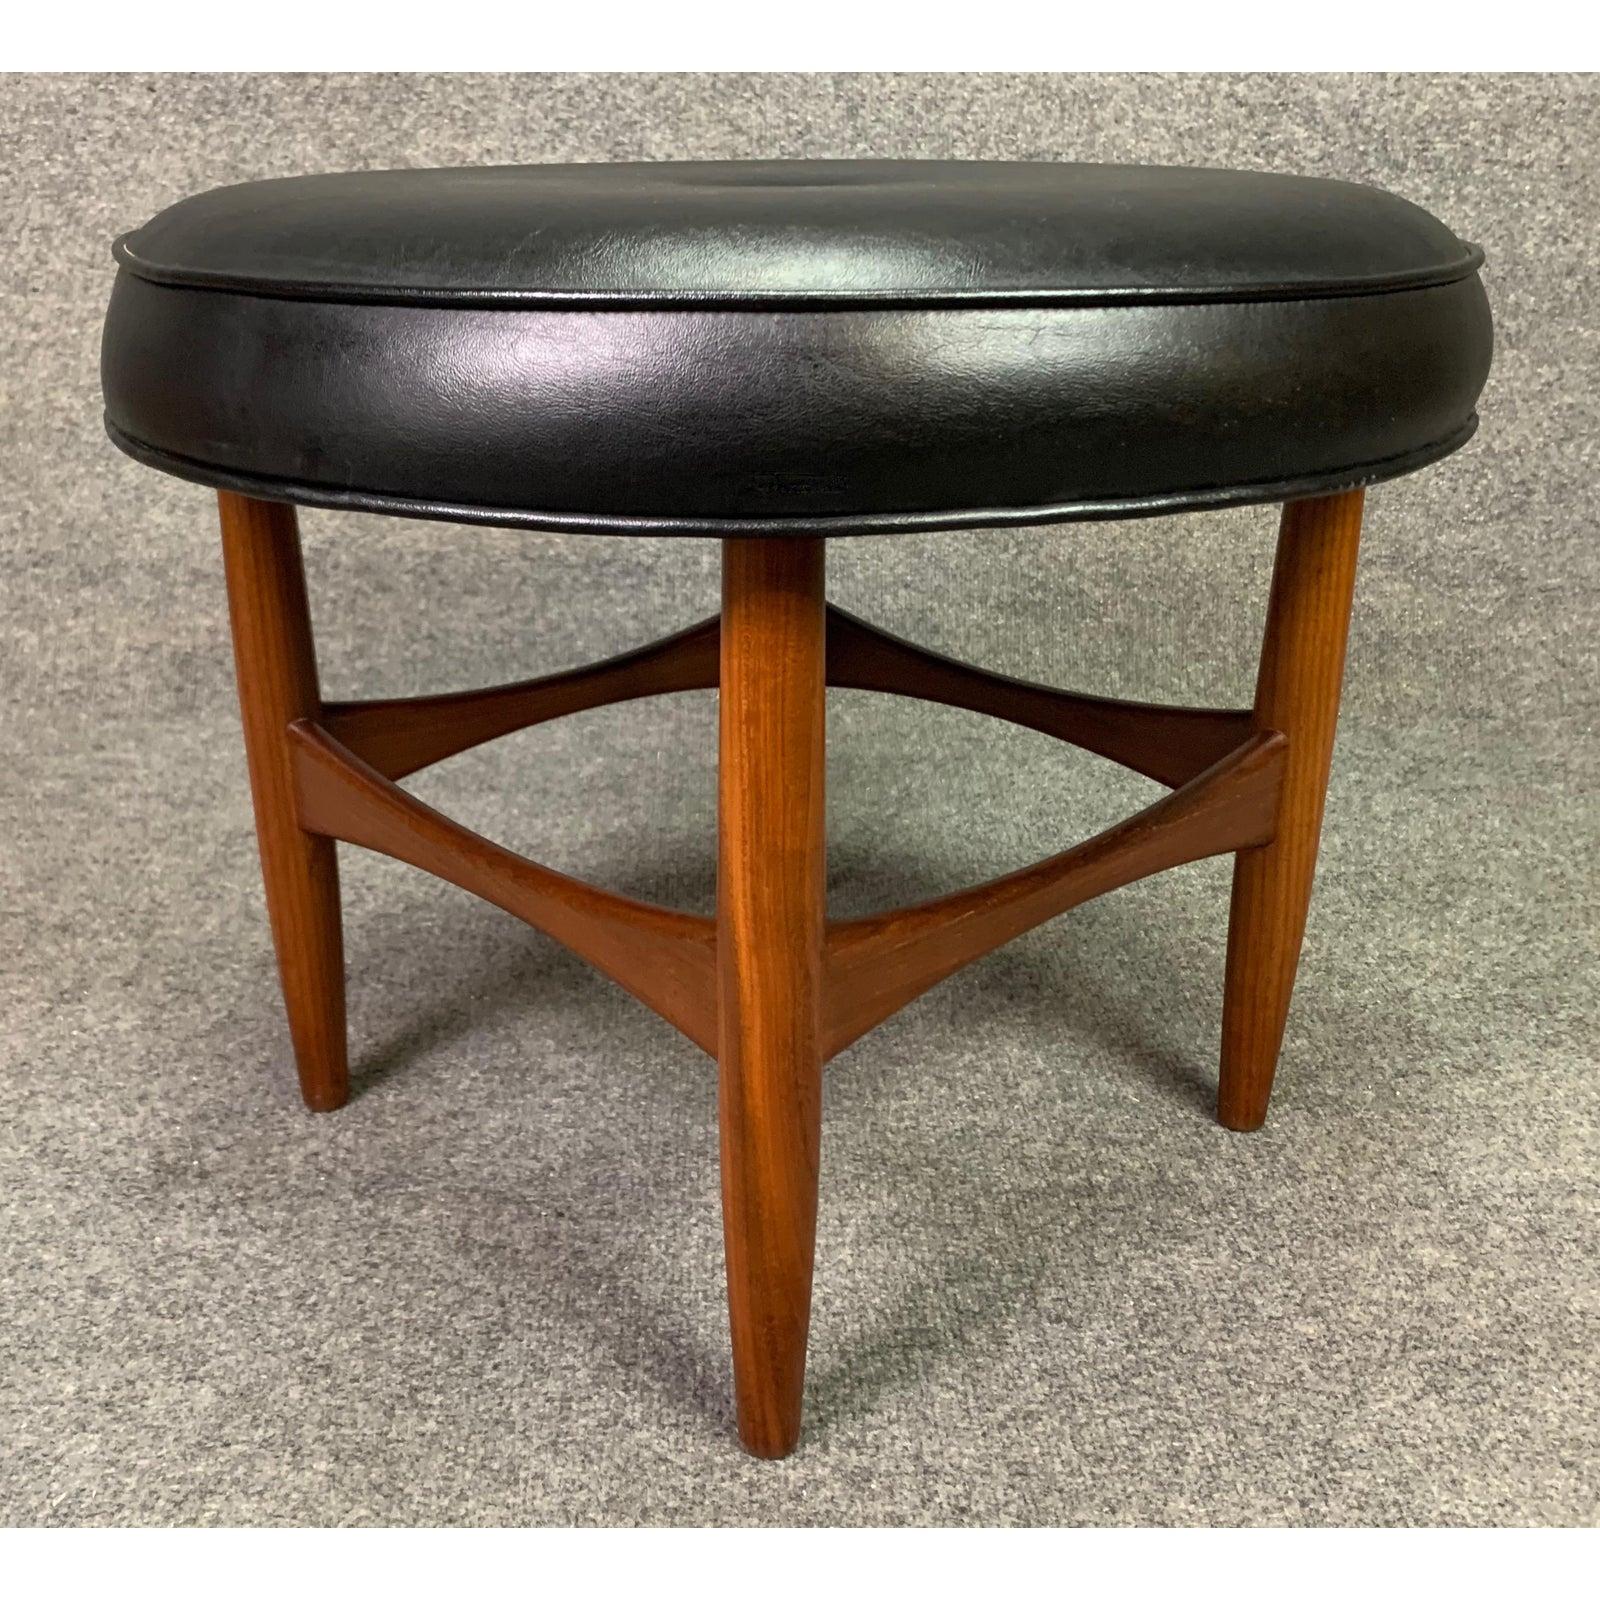 Here is a beautiful British modern footstool in teak wood designed by Kofod Larsen for the Danish design collection of G Plan manufactured in England in the 1960s.
This lovely ottoman, recently imported from UK to California, features a solid